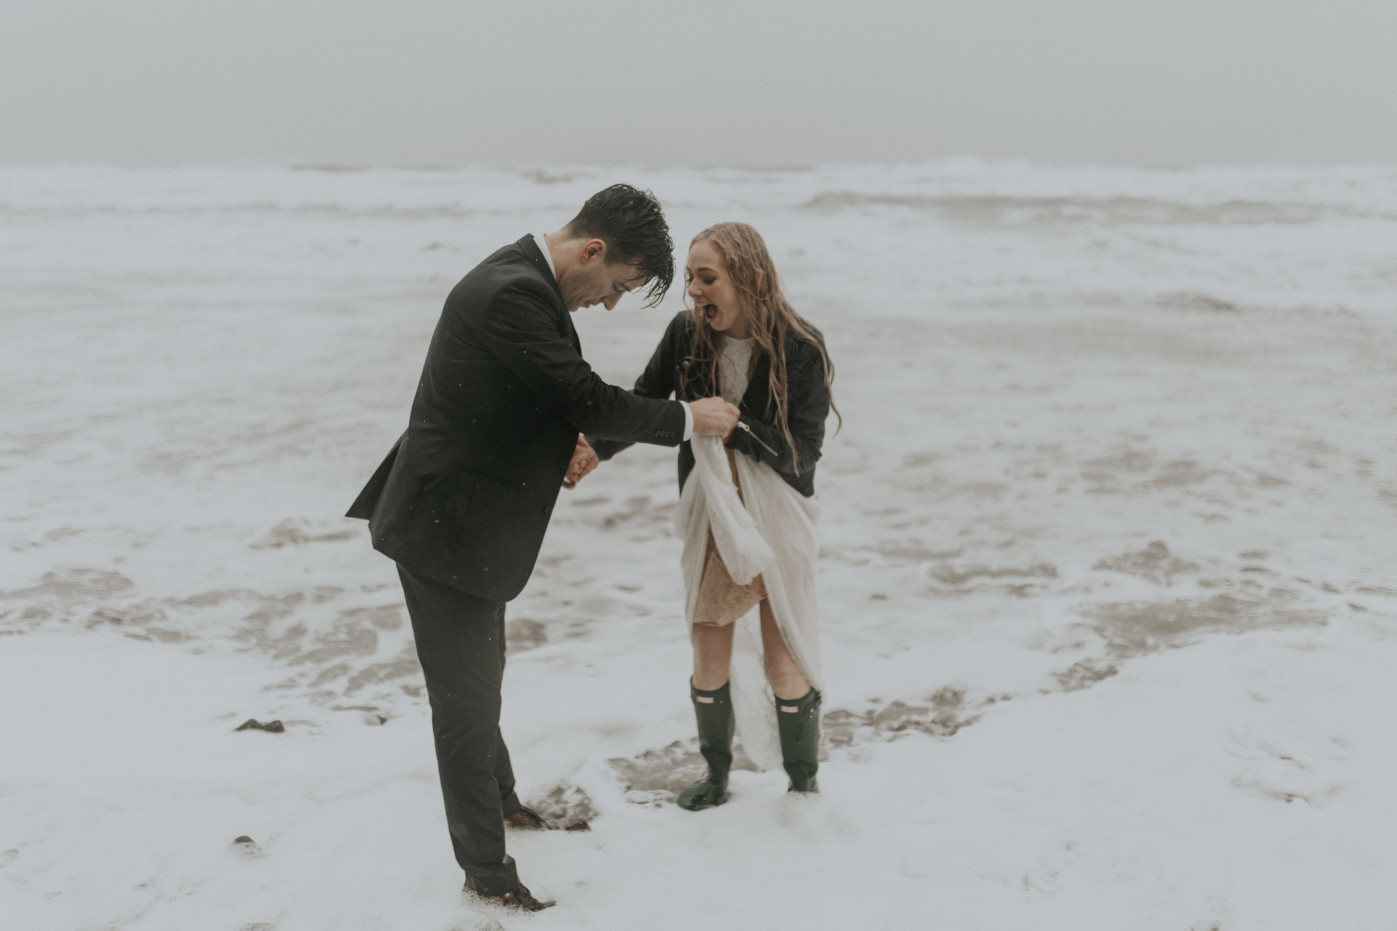 Hannah and Grant get their feet wet at the shore of Hug Point in Cannon Beach, Oregon during their elopement. Wedding photography in Portland Oregon by Sienna Plus Josh.